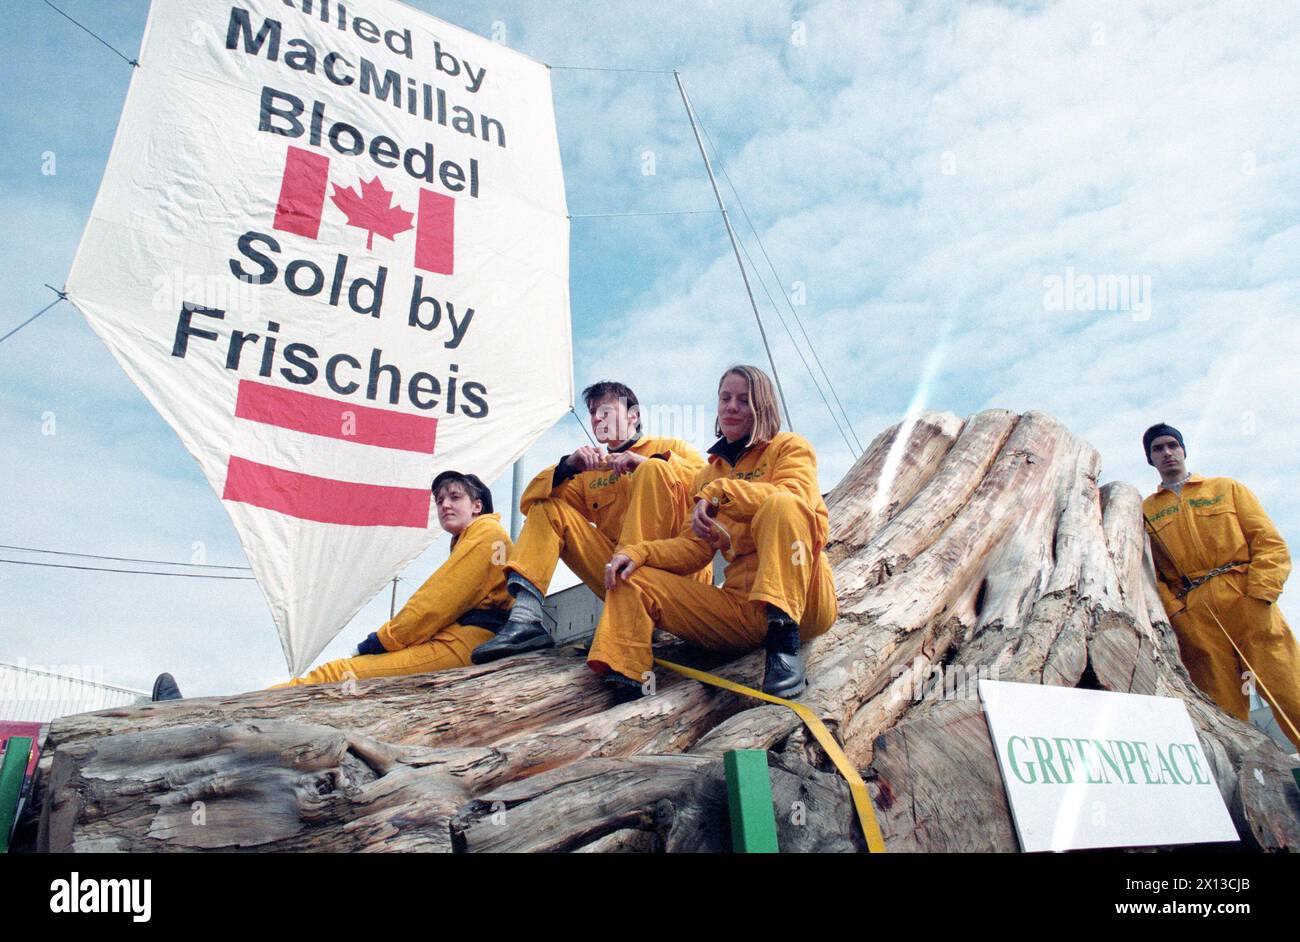 Stockerau on April 19th 1994: About 20 activists of Greenpeace chained up at the gates of J & A Freischeis and obstructed the access of the Lower Austrian timber merchant. - 19940419 PD0004 - Rechteinfo: Rights Managed (RM) Stock Photo